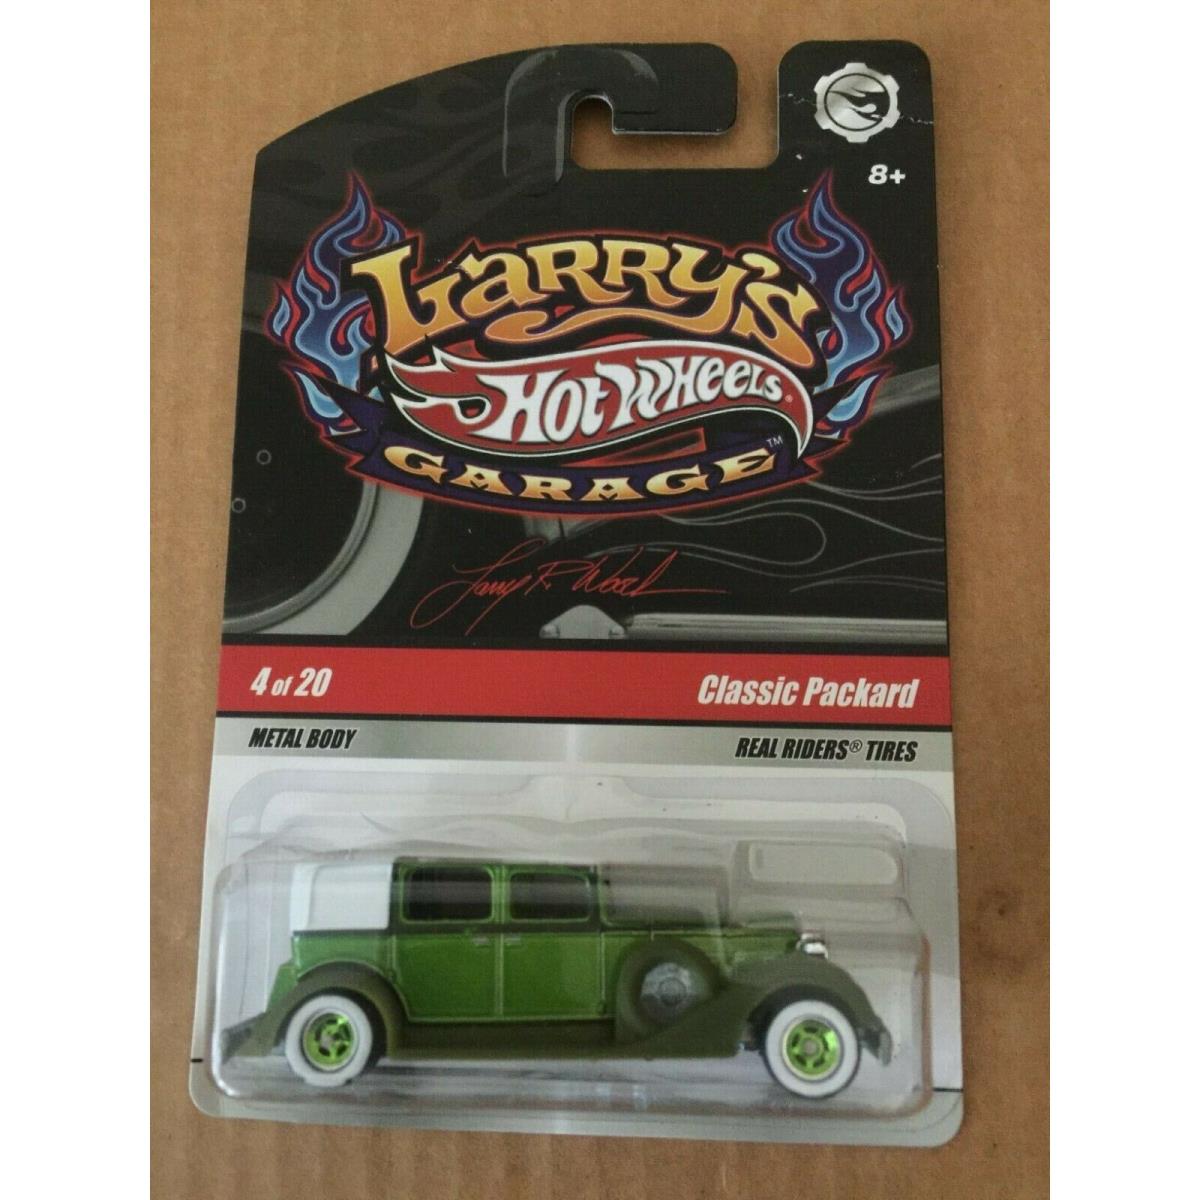 2008 Chase Hot Wheels Classic Packard Larry`s Garage Series Green 1:64 B48